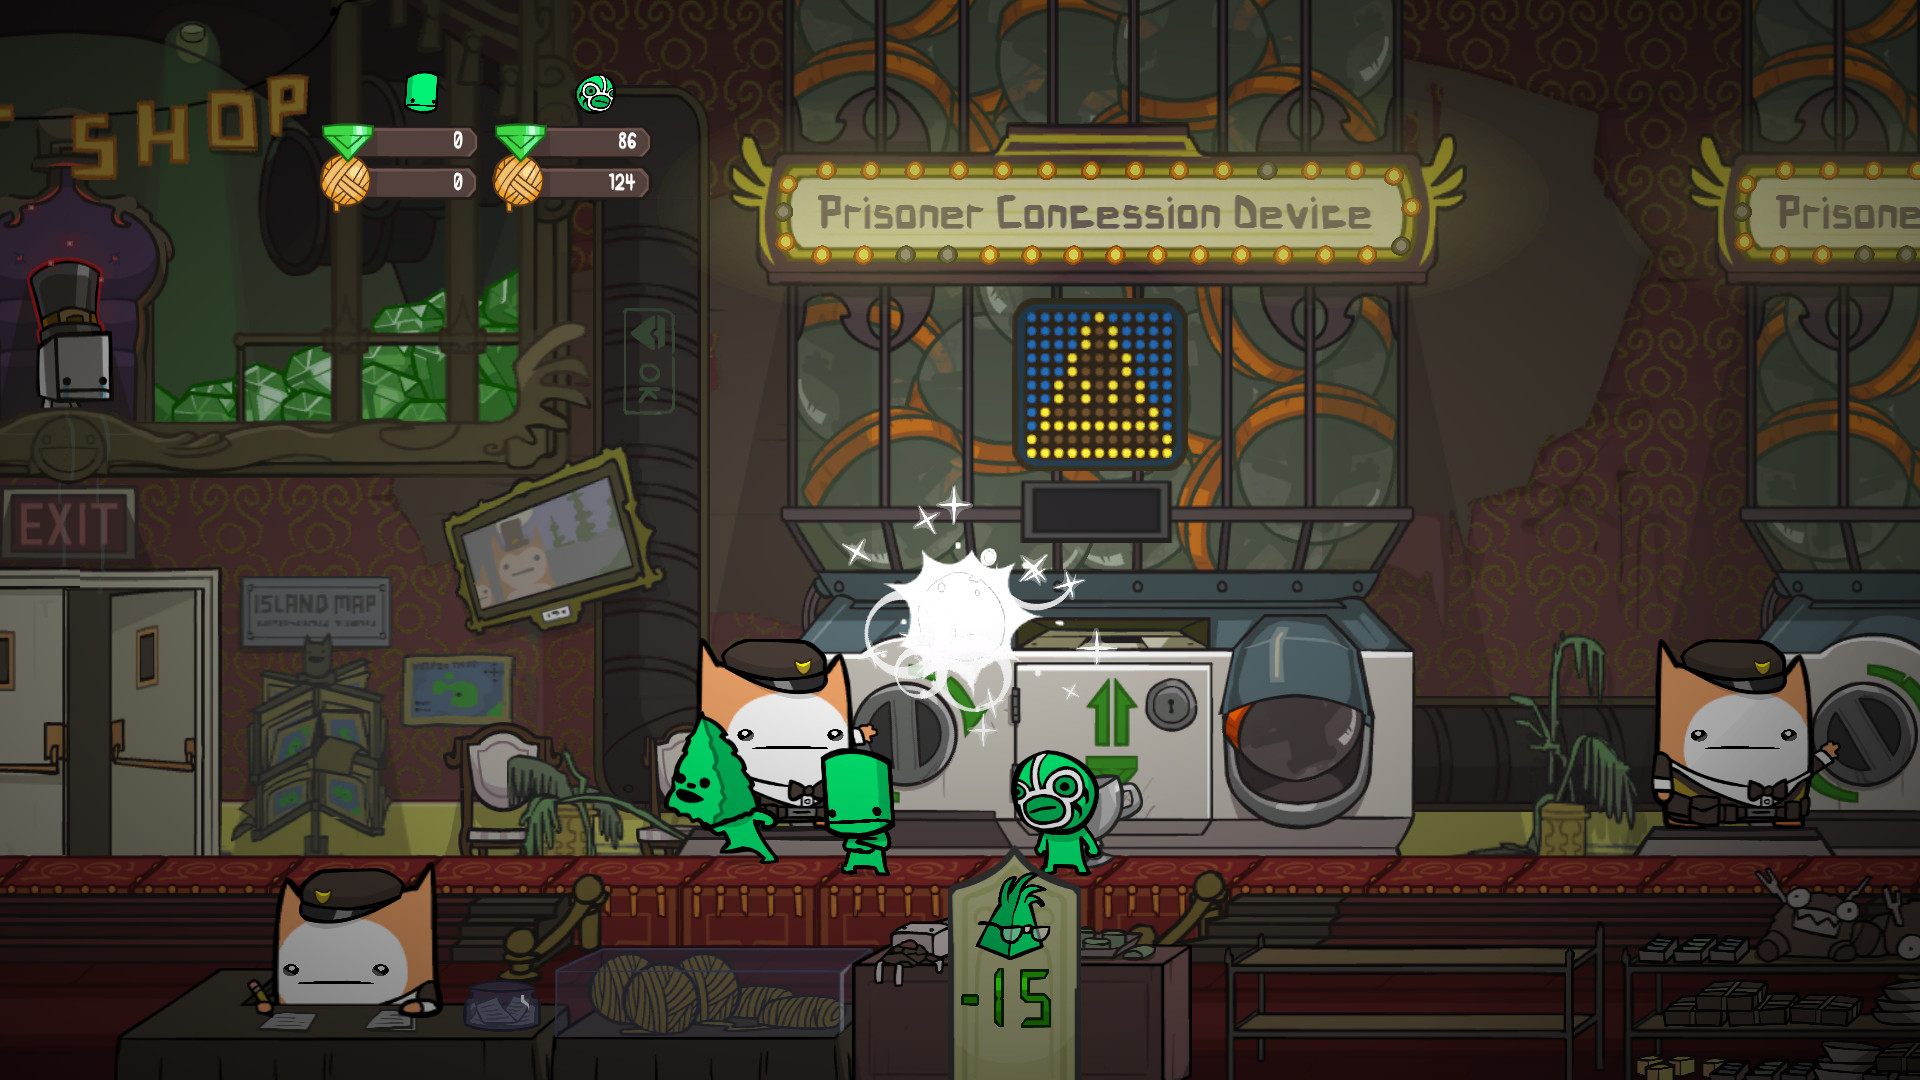 1920x1080 BattleBlock Theater Windows Spending gems to free the prisoners. There are  300 of them.